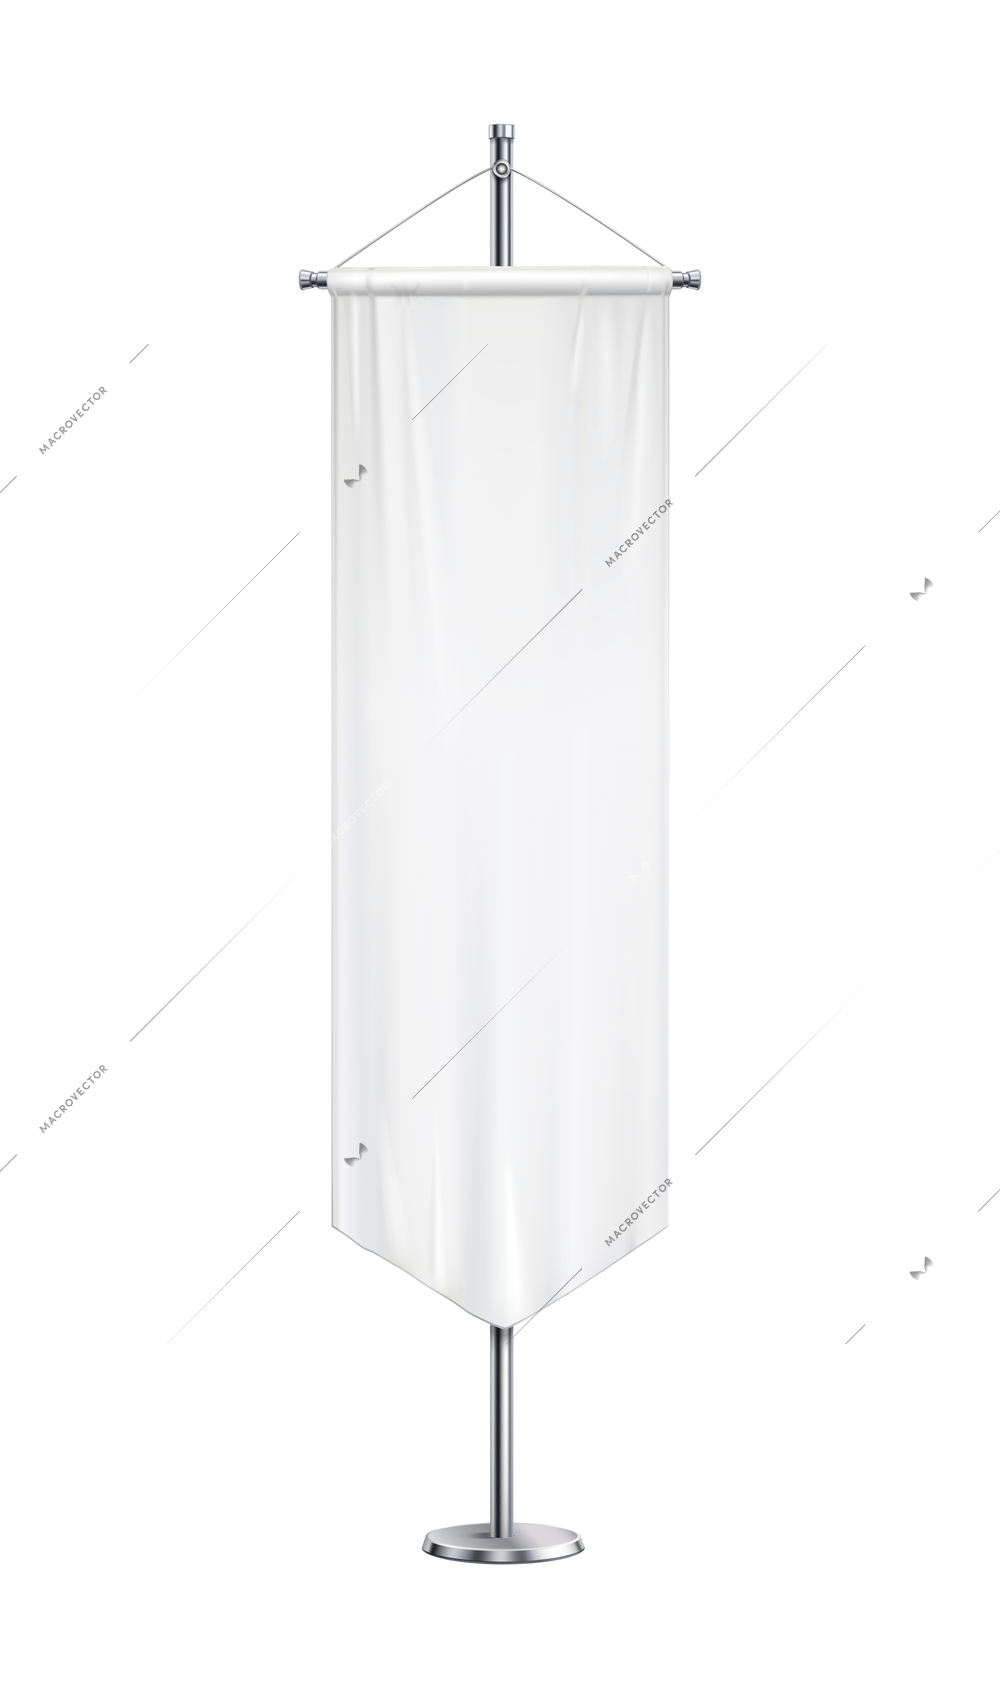 Pennant realistic composition with isolated image of long white pennon hanging on post vector illustration